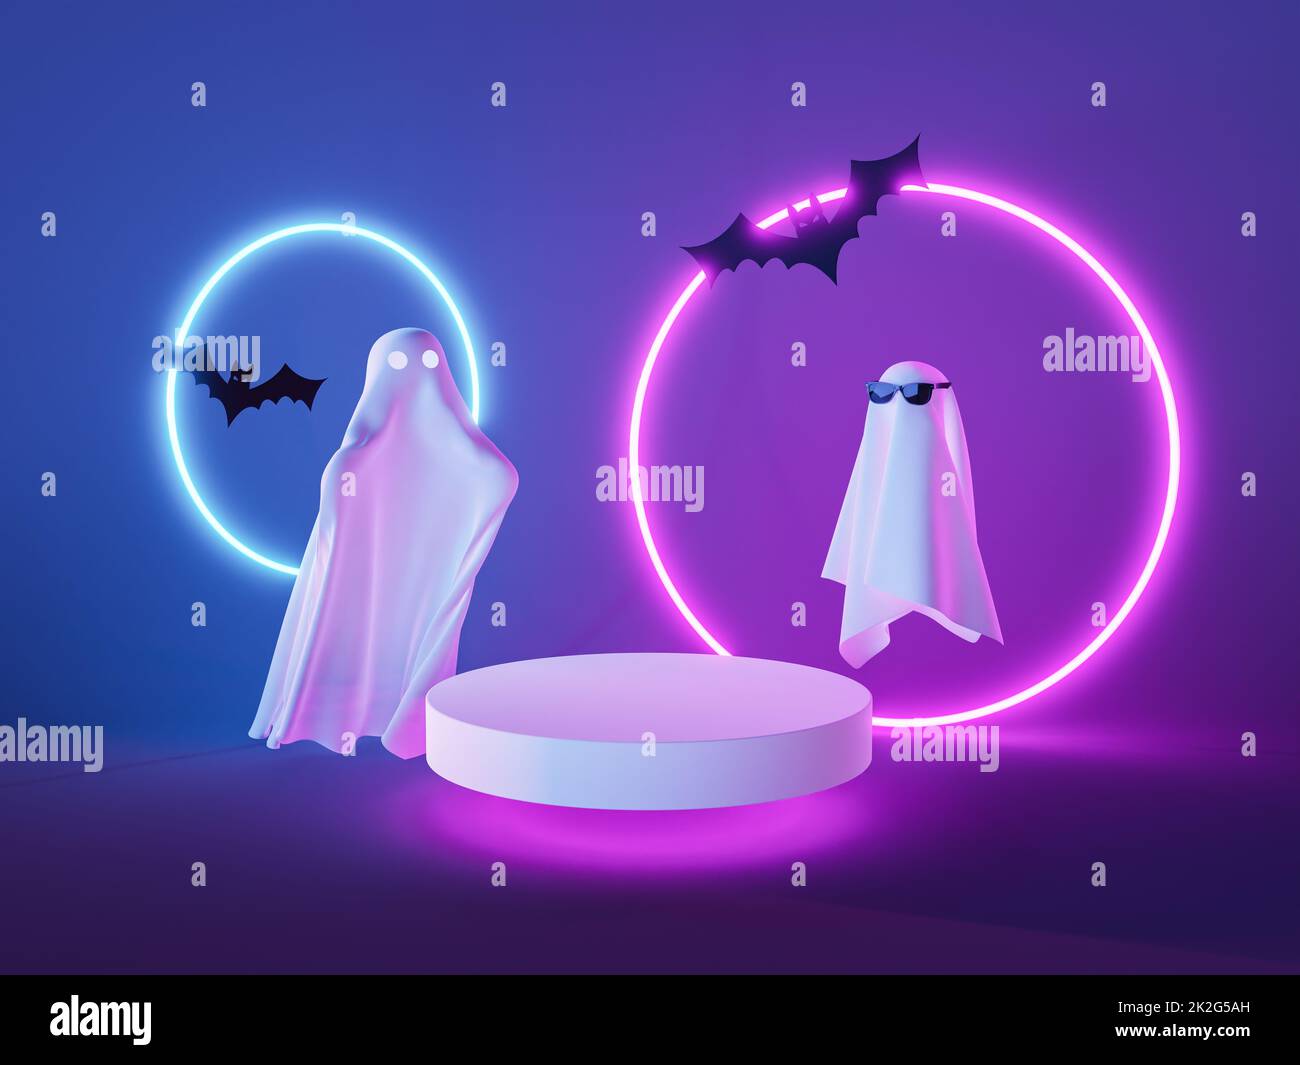 3D rendering of spooky white ghosts with black bats flying near illuminated neon ring lamps and stand against purple background Stock Photo